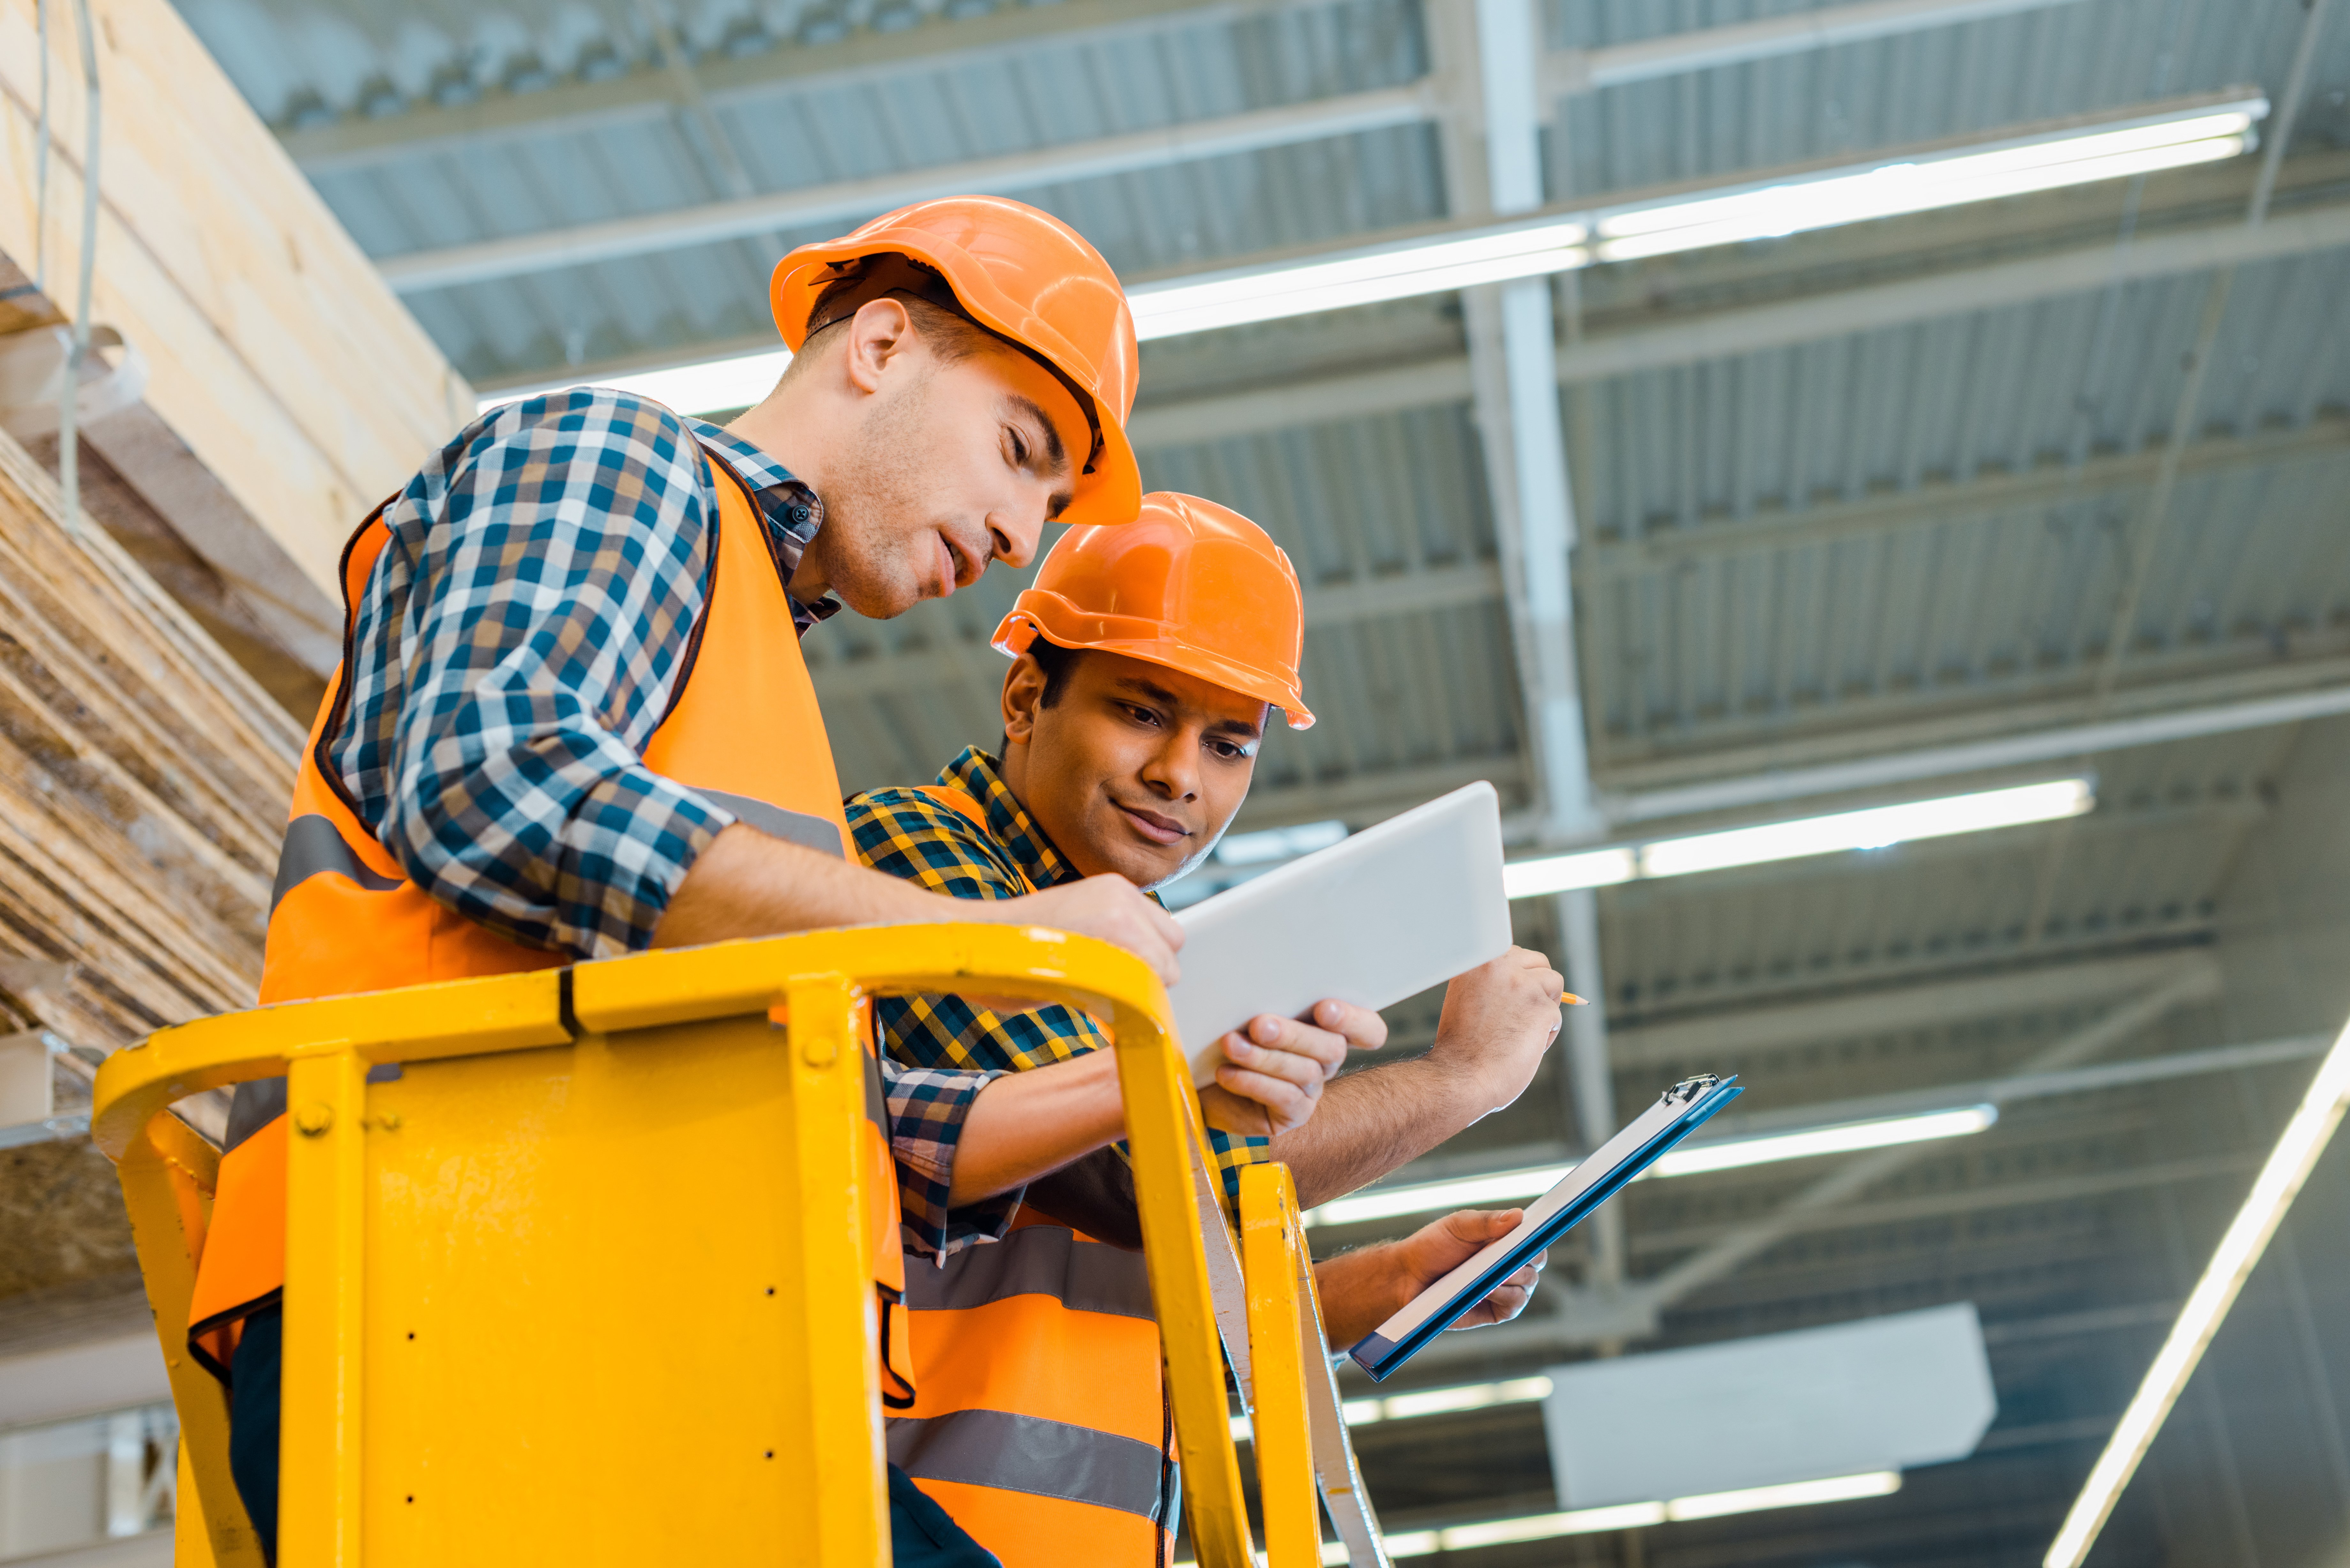 two workers in orange construction hats on a lift in a warehouse looking at an iPad